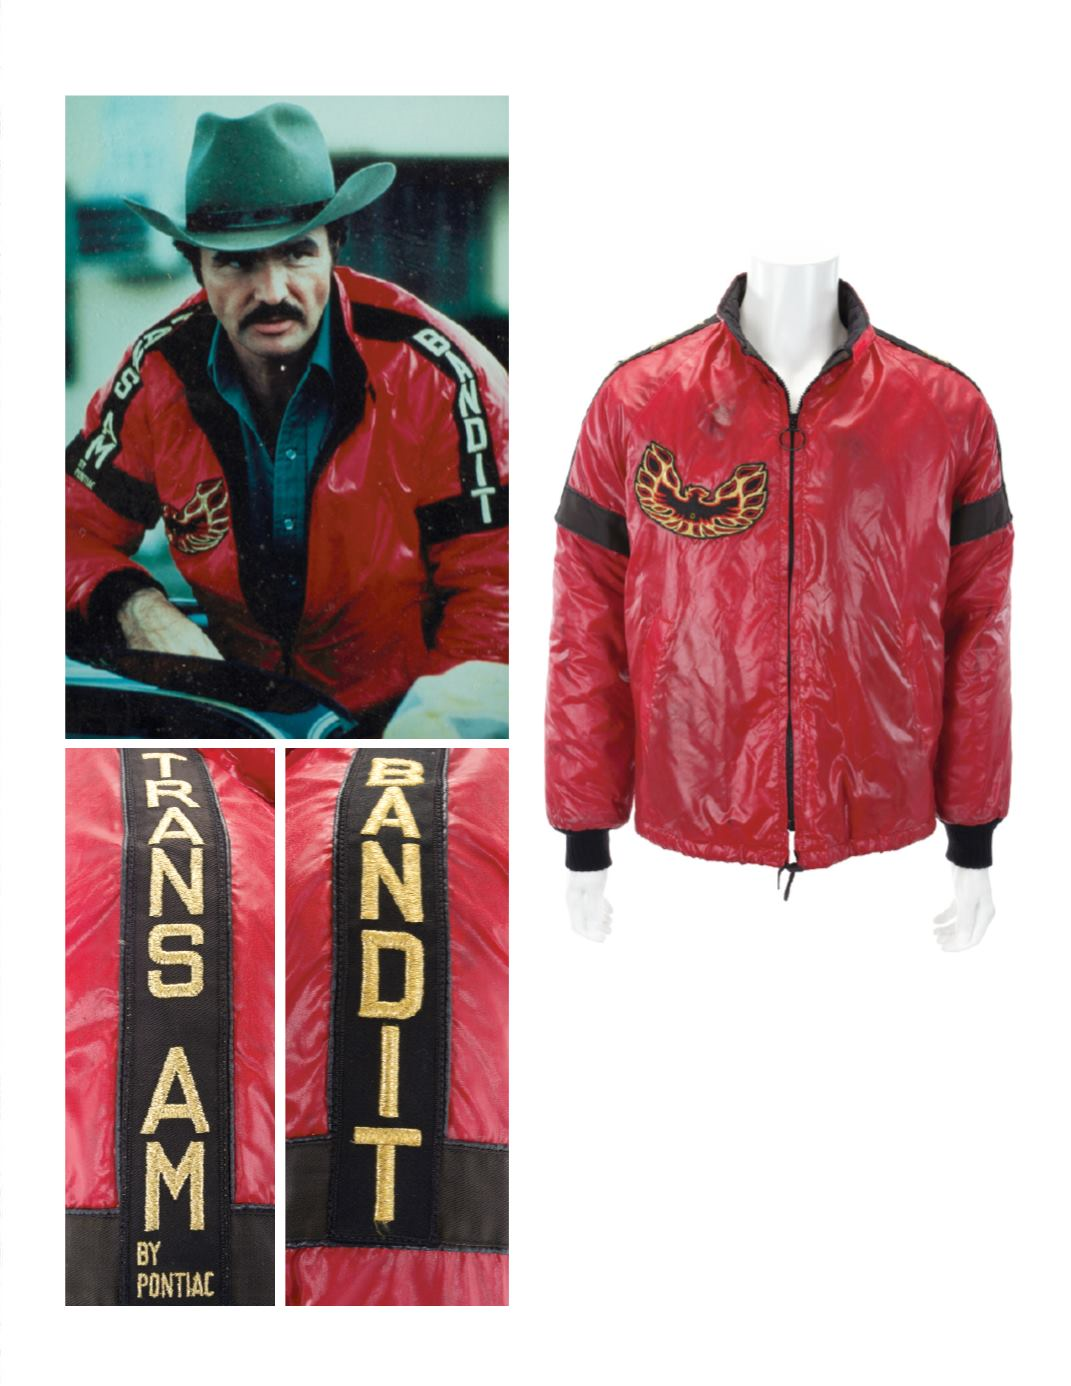 Reynolds' satin jacket from "Smokey and the Bandit".